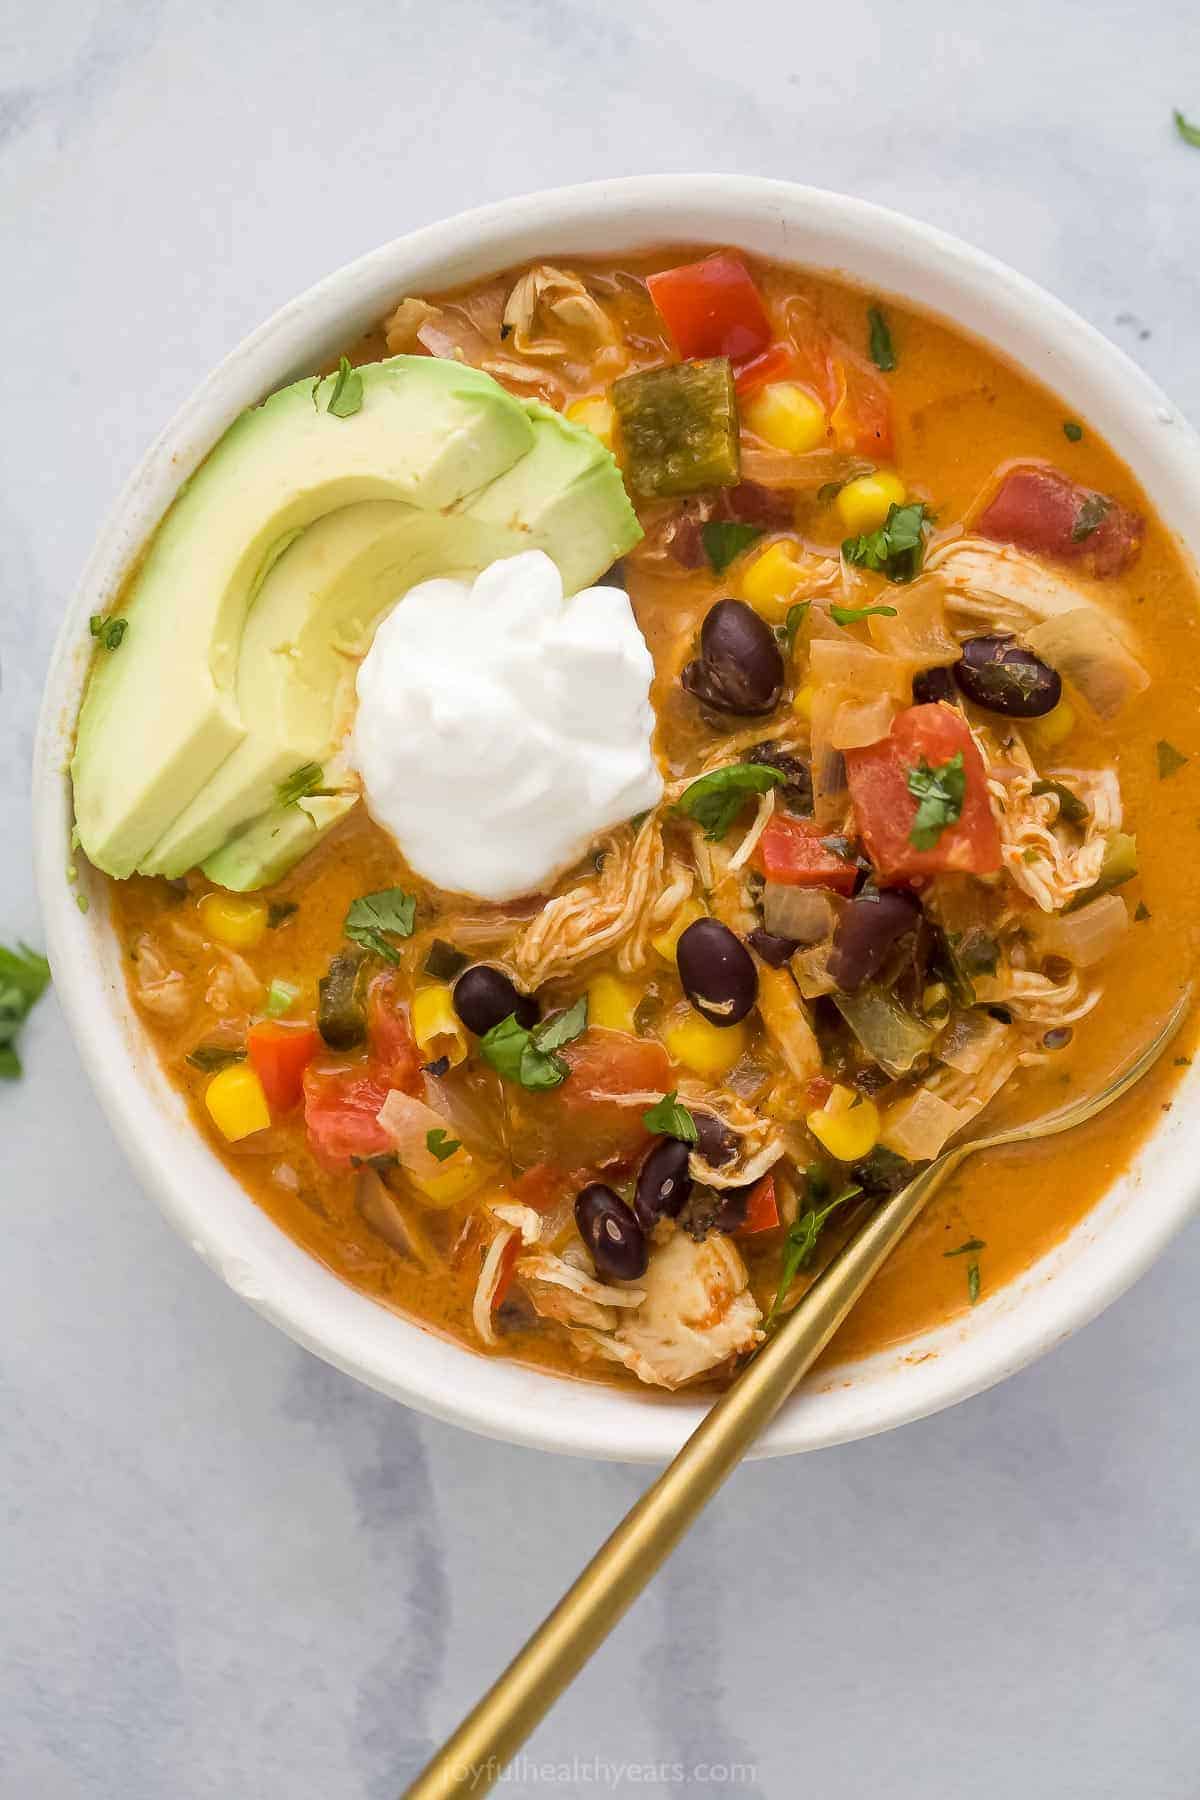 A bowl of chicken enchilada soup topped with sour cream and avocado slices.